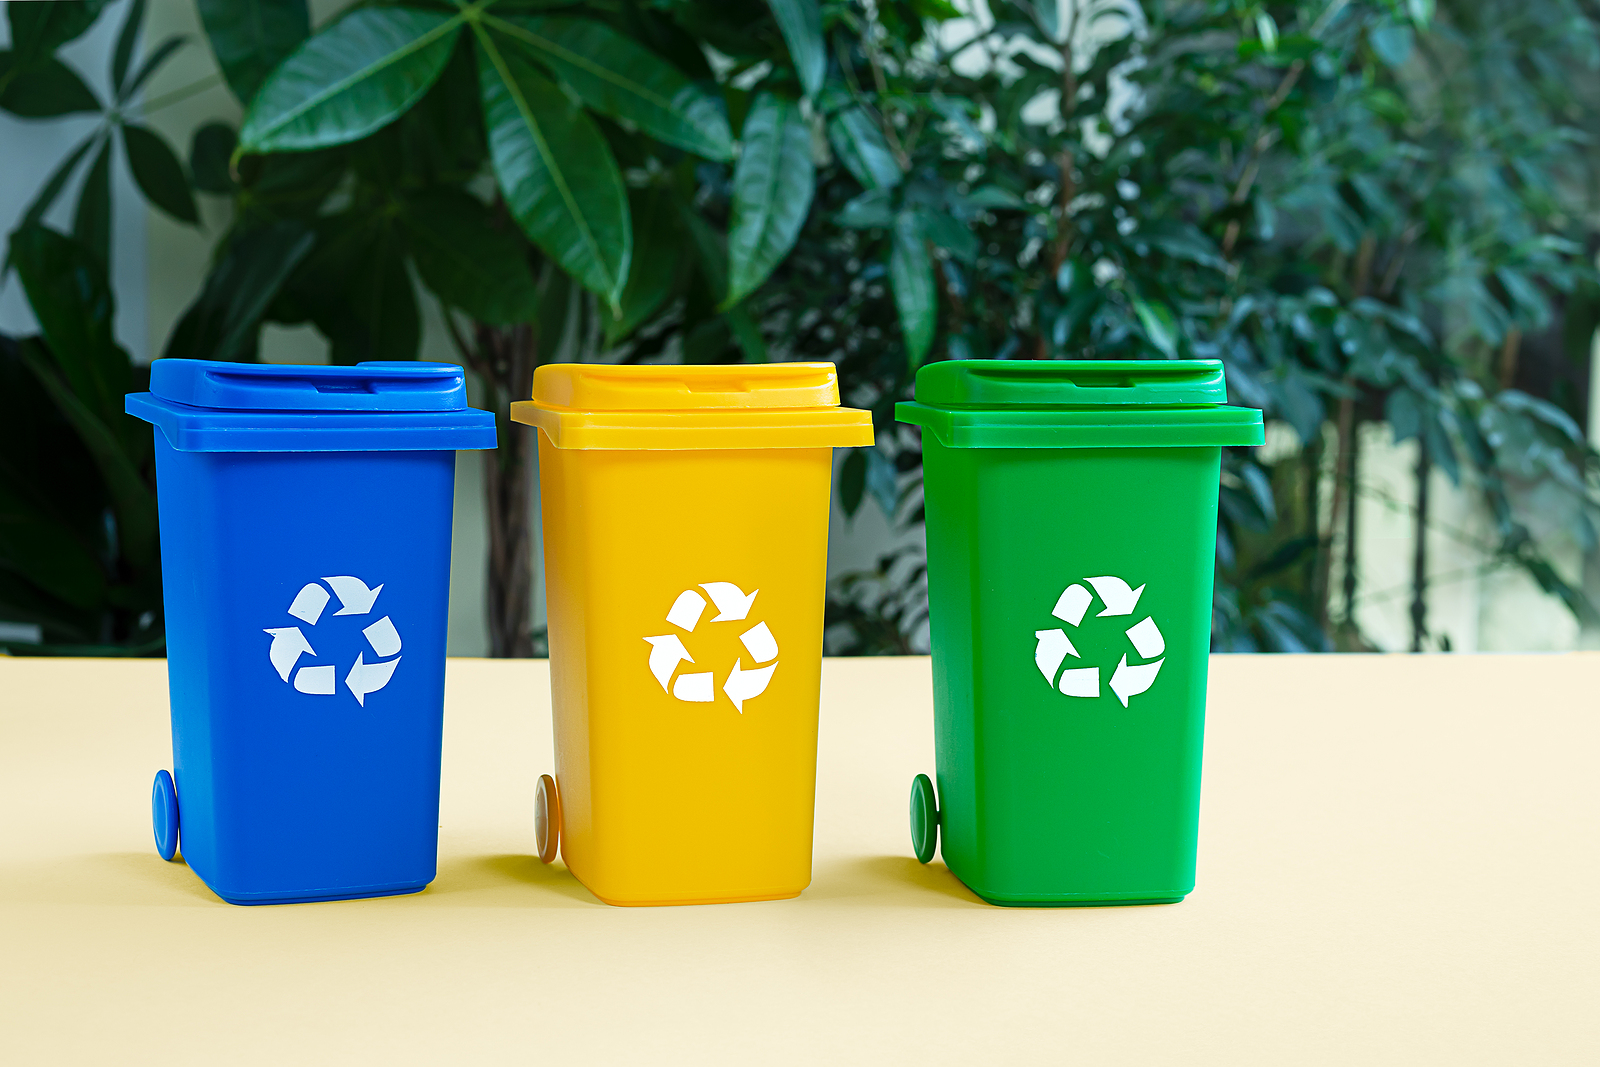 Blue, yellow and green tank for separate garbage collection against bacground with green plants, waste recycling and conservation of the environment concept